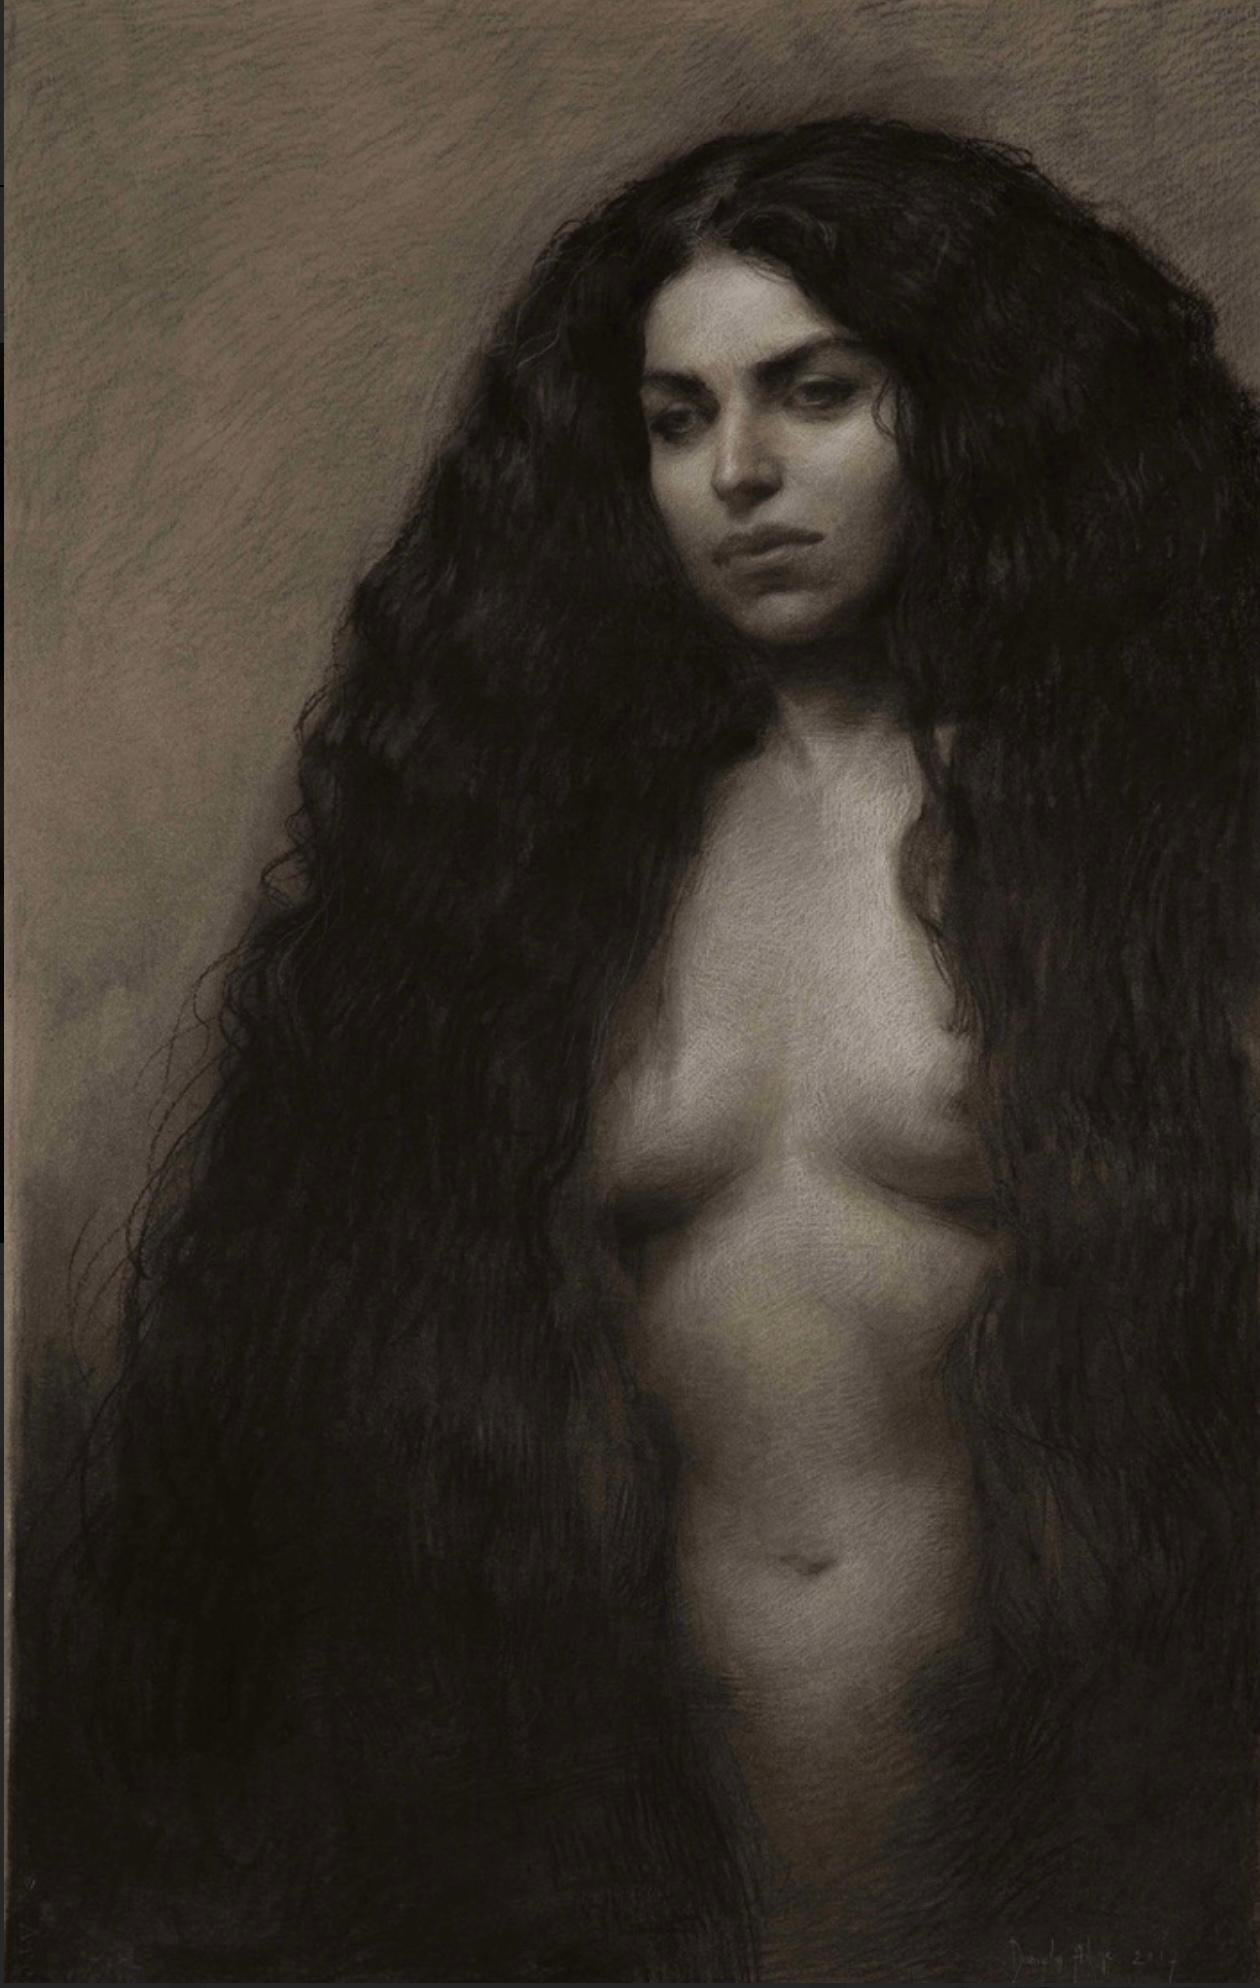 Daniela Astone Nude - Scilla- 21st Century Italian charcoal drawing of a nude woman with long hair